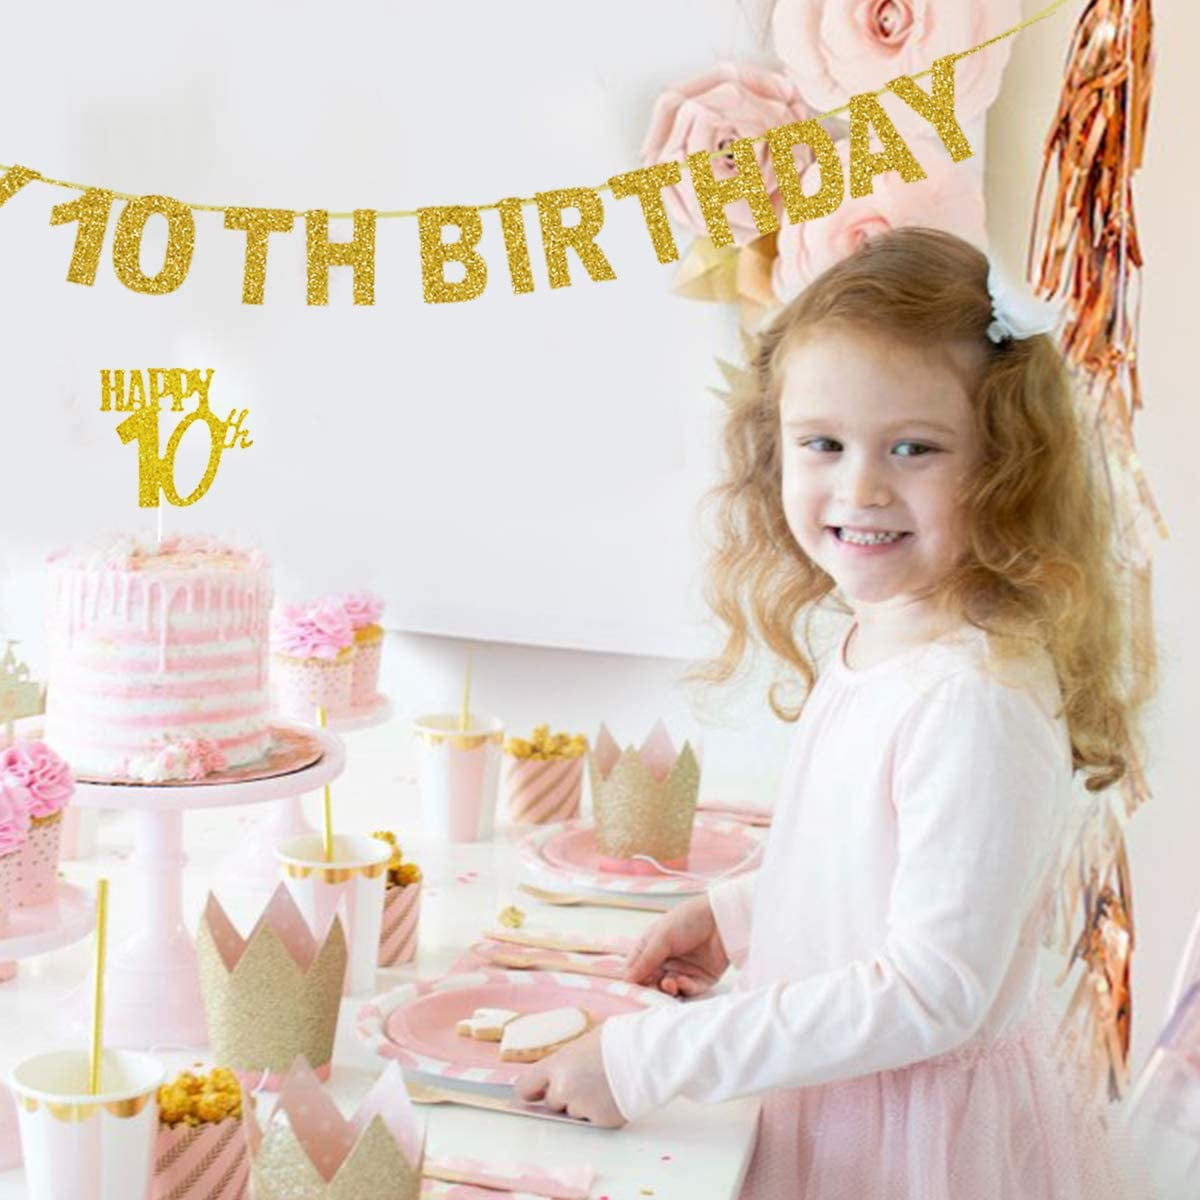 10th Birthday Decorations for Girls Rose Gold Double Digits 10 Foil Balloons Banner Happy 10th Birthday Banner and Cake Topper Set for 10th Girls' Birthday Party Decor - Walmart.com